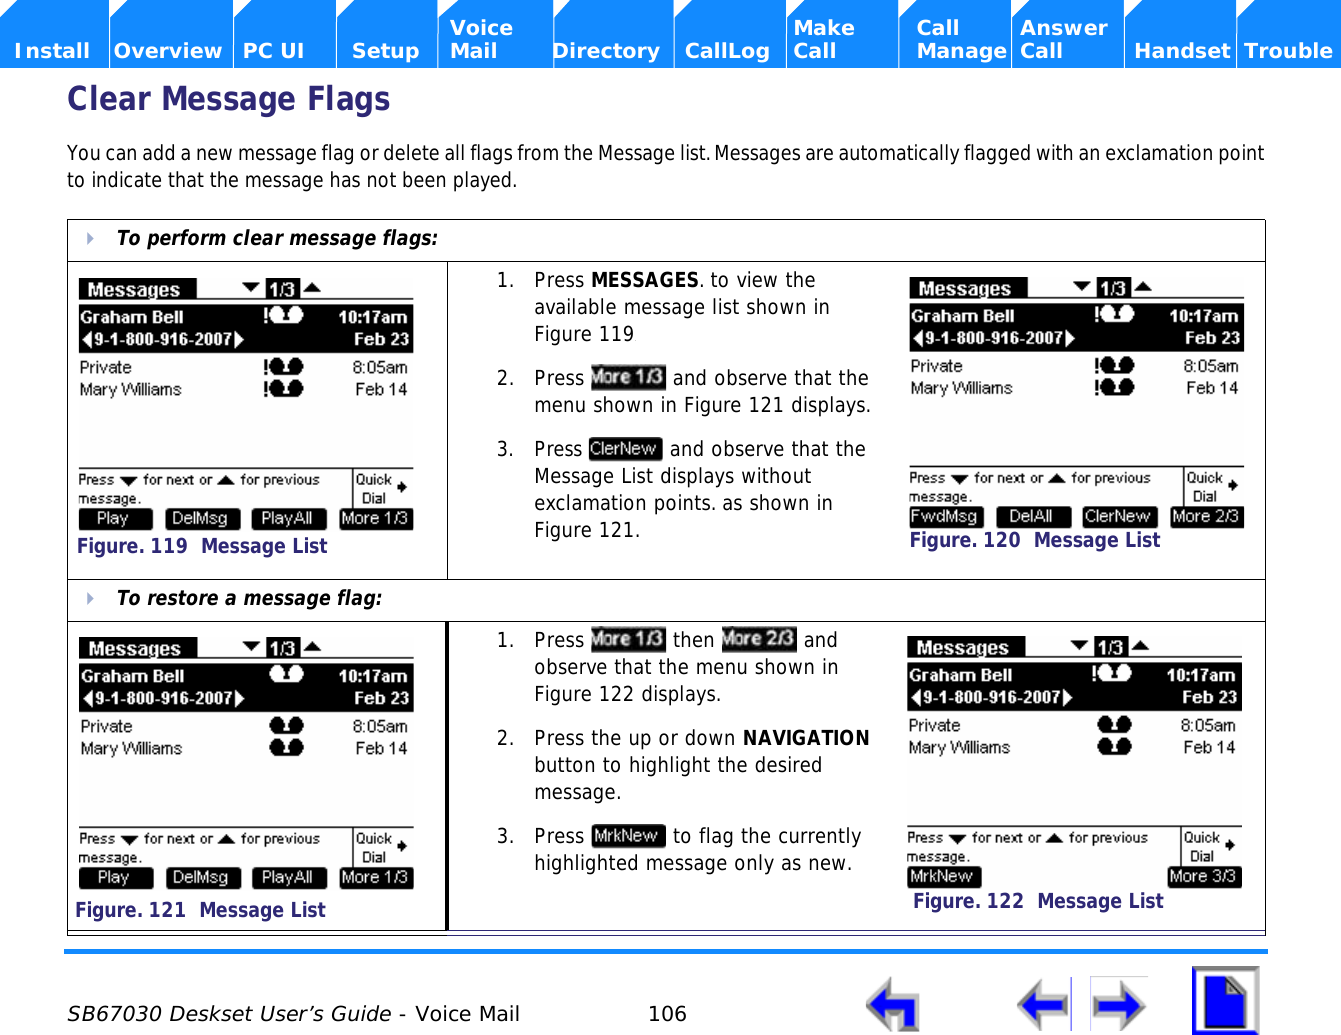  SB67030 Deskset User’s Guide - Voice Mail 106    Voice Make Call Answer  Install Overview PC UI Setup Mail Directory CallLog Call Manage Call Handset TroubleClear Message FlagsYou can add a new message flag or delete all flags from the Message list. Messages are automatically flagged with an exclamation point to indicate that the message has not been played. To perform clear message flags:1. Press MESSAGES. to view the available message list shown in Figure 119.2. Press   and observe that the menu shown in Figure 121 displays.3. Press   and observe that the Message List displays without exclamation points. as shown in Figure 121.To restore a message flag:1. Press  then  and observe that the menu shown in Figure 122 displays.2. Press the up or down NAVIGATION button to highlight the desired message.3. Press   to flag the currently highlighted message only as new.Figure. 119  Message ListFigure. 120  Message ListFigure. 121  Message ListFigure. 122  Message List